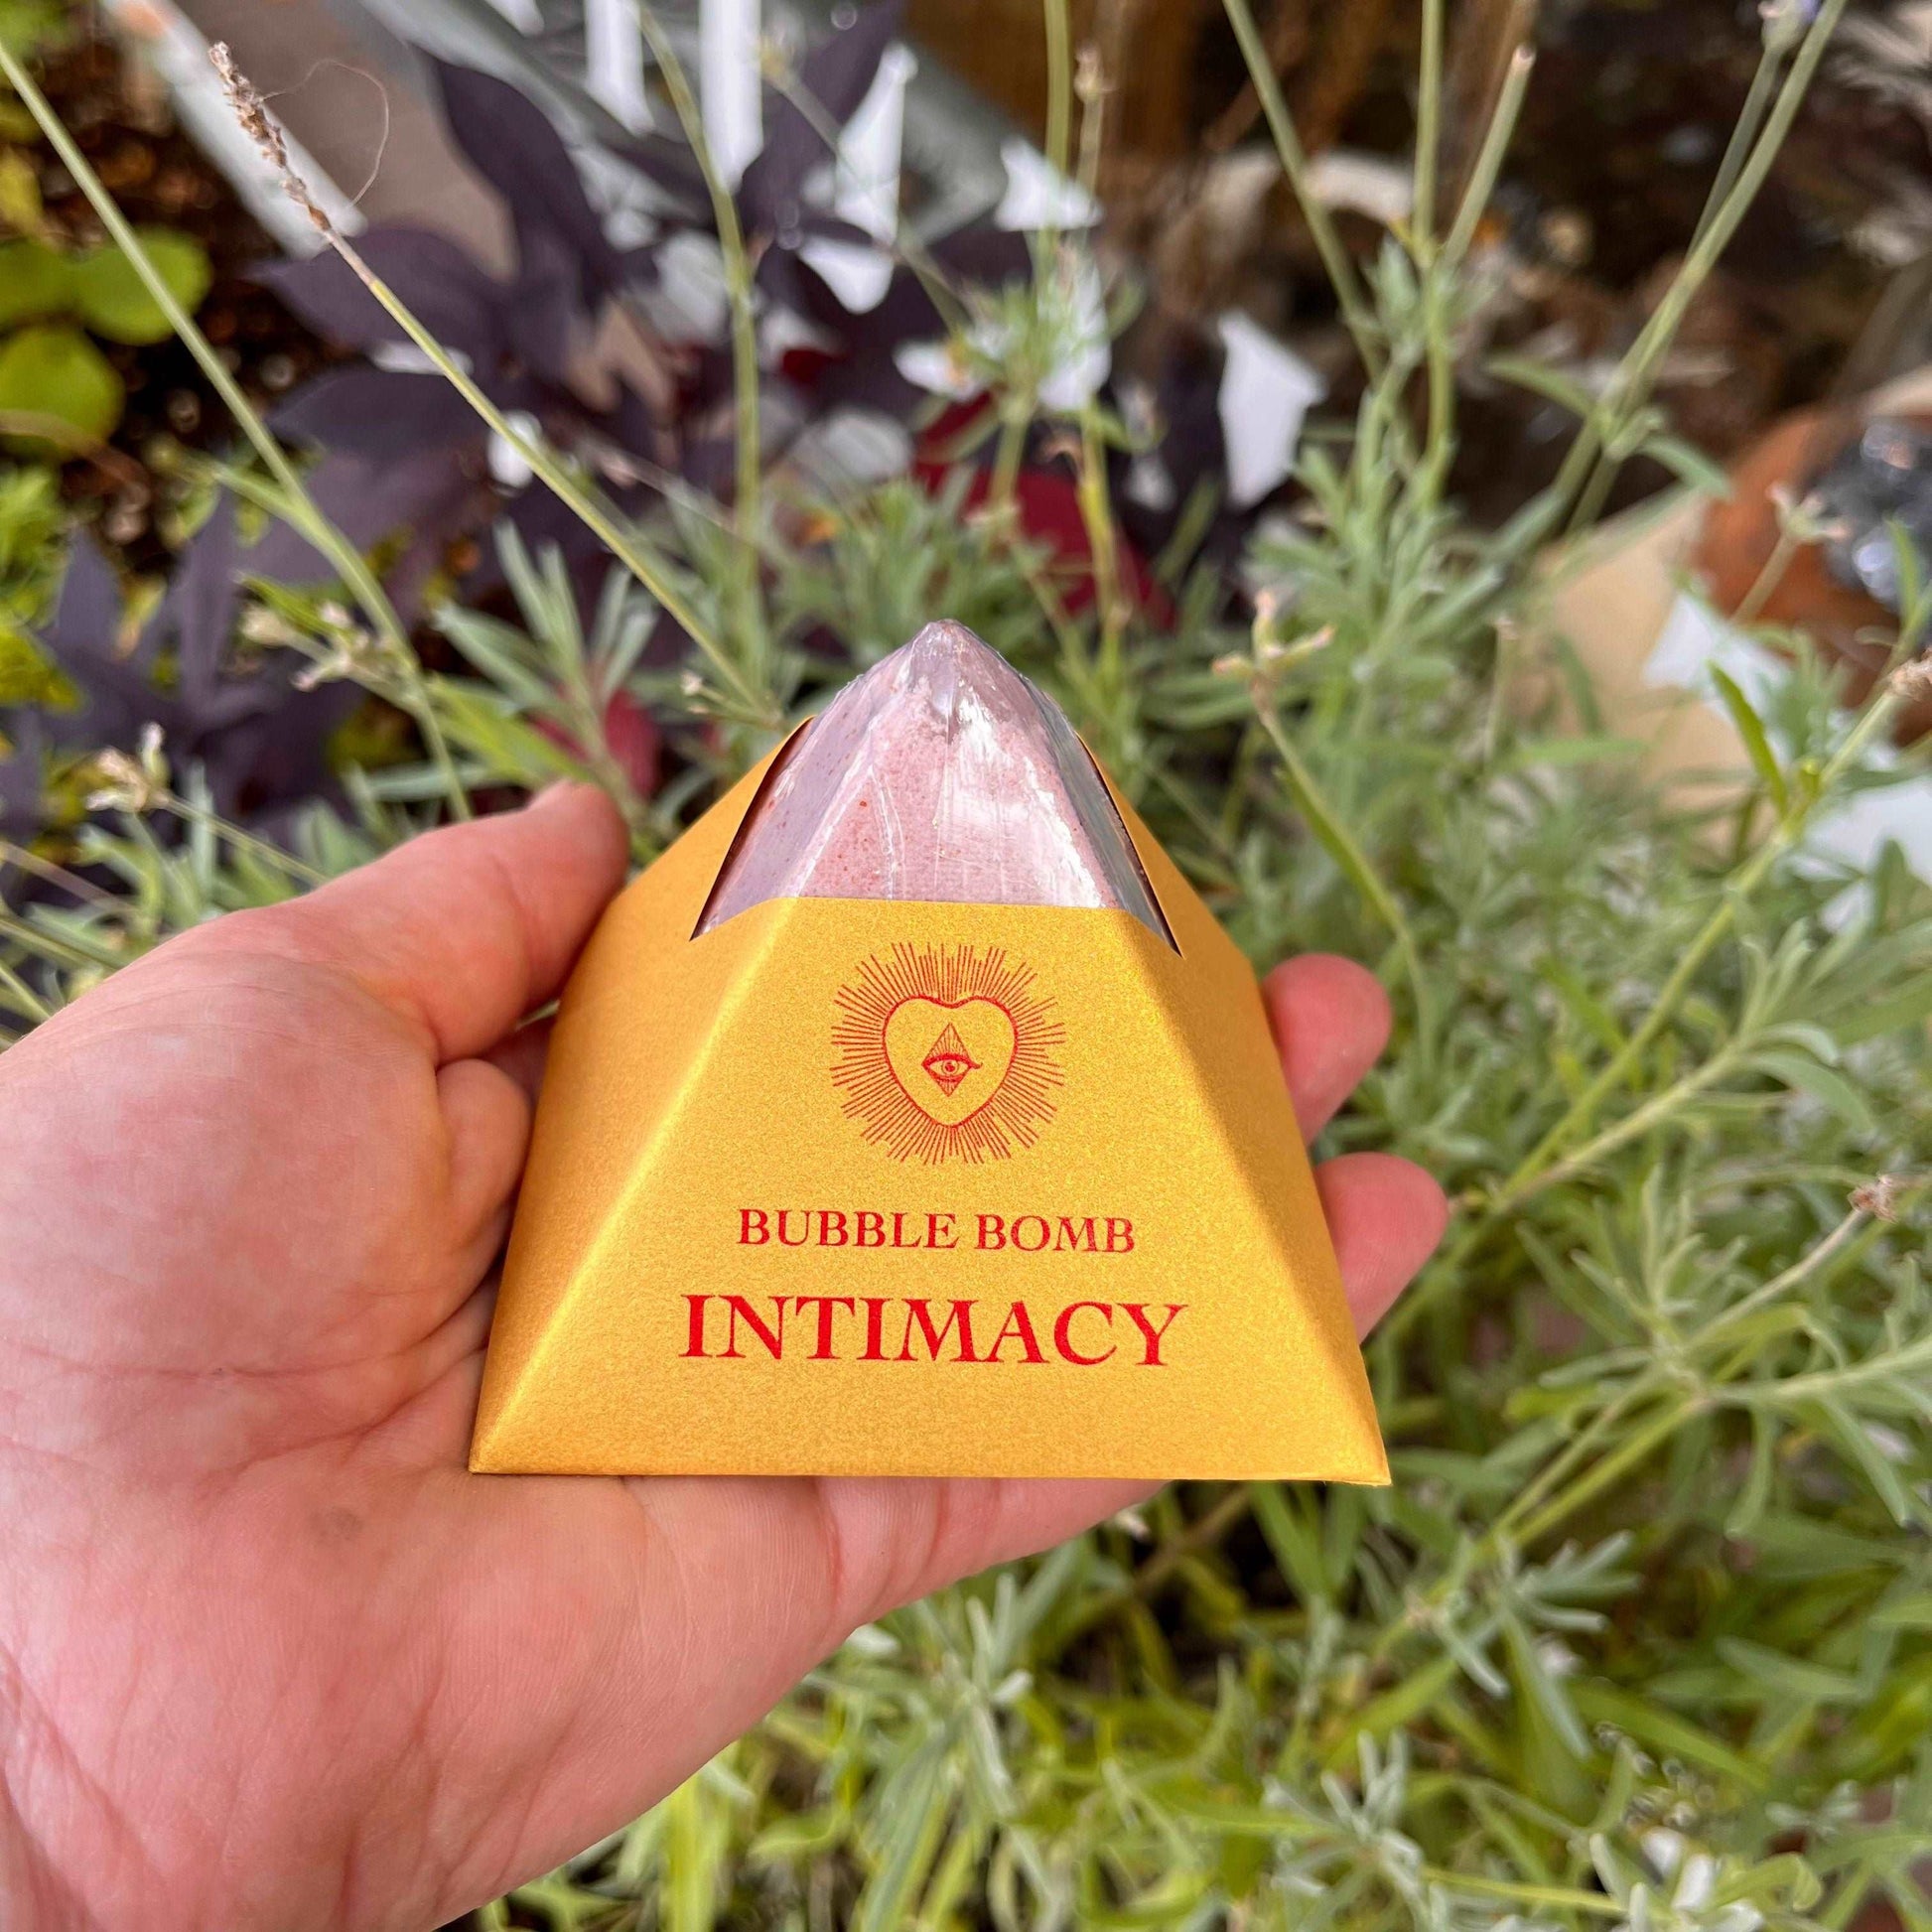 Elevate your bath time with our Intimacy Bubble Bomb, infused with the enticing blend of organic Orange, Bergamot, and Grapefruit essential oils. Immerse yourself in a luxurious bubble bath experience that promotes a sensual and uplifting atmosphere, enhancing feelings of connection and joy.